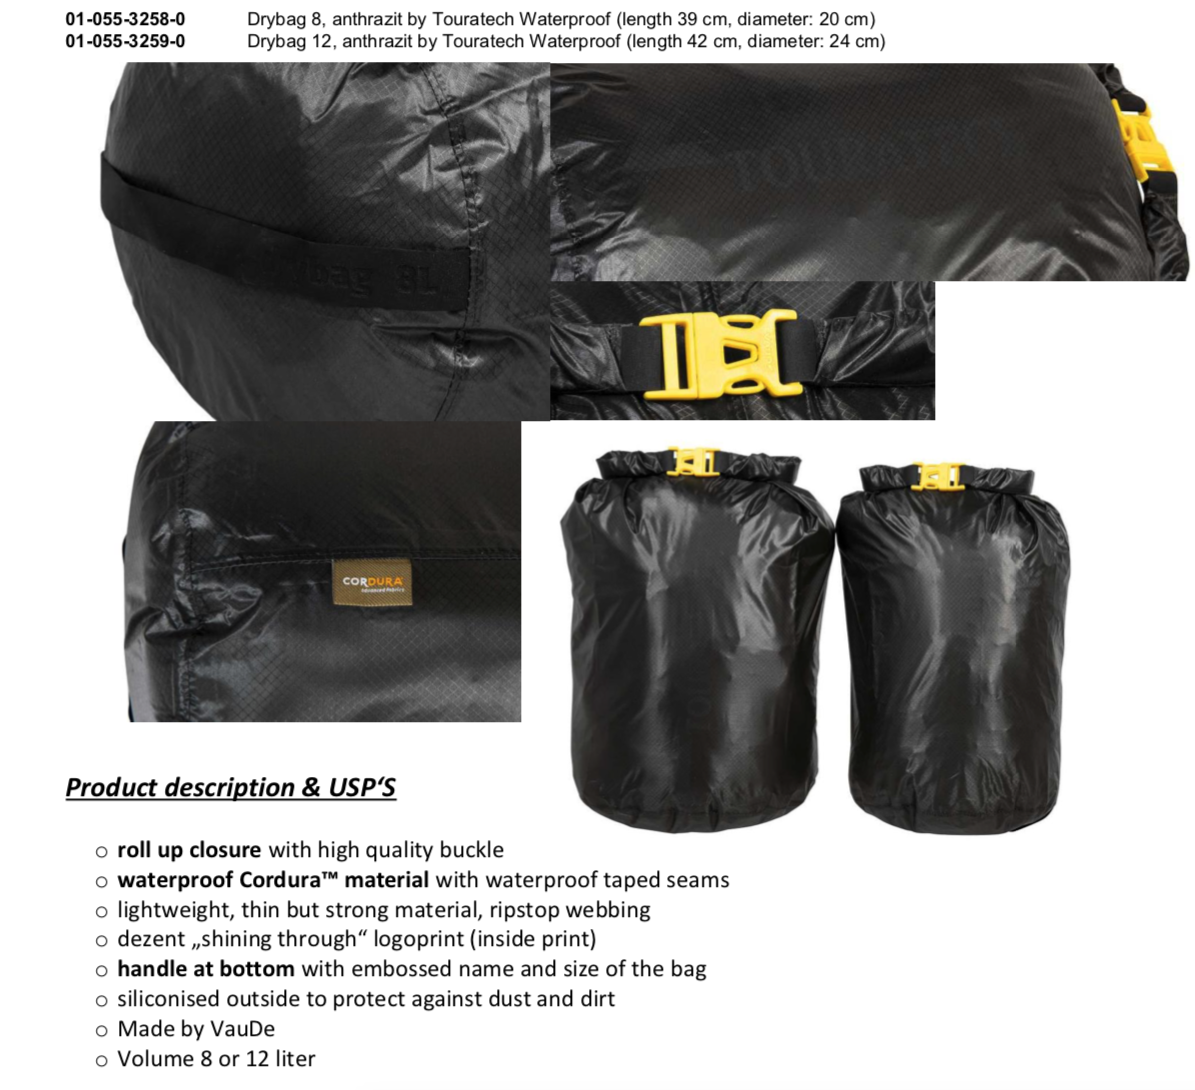 Drybag 12, anthrazit by Touratech WaterproofDrybag 12, anthrazit by Touratech Waterproof